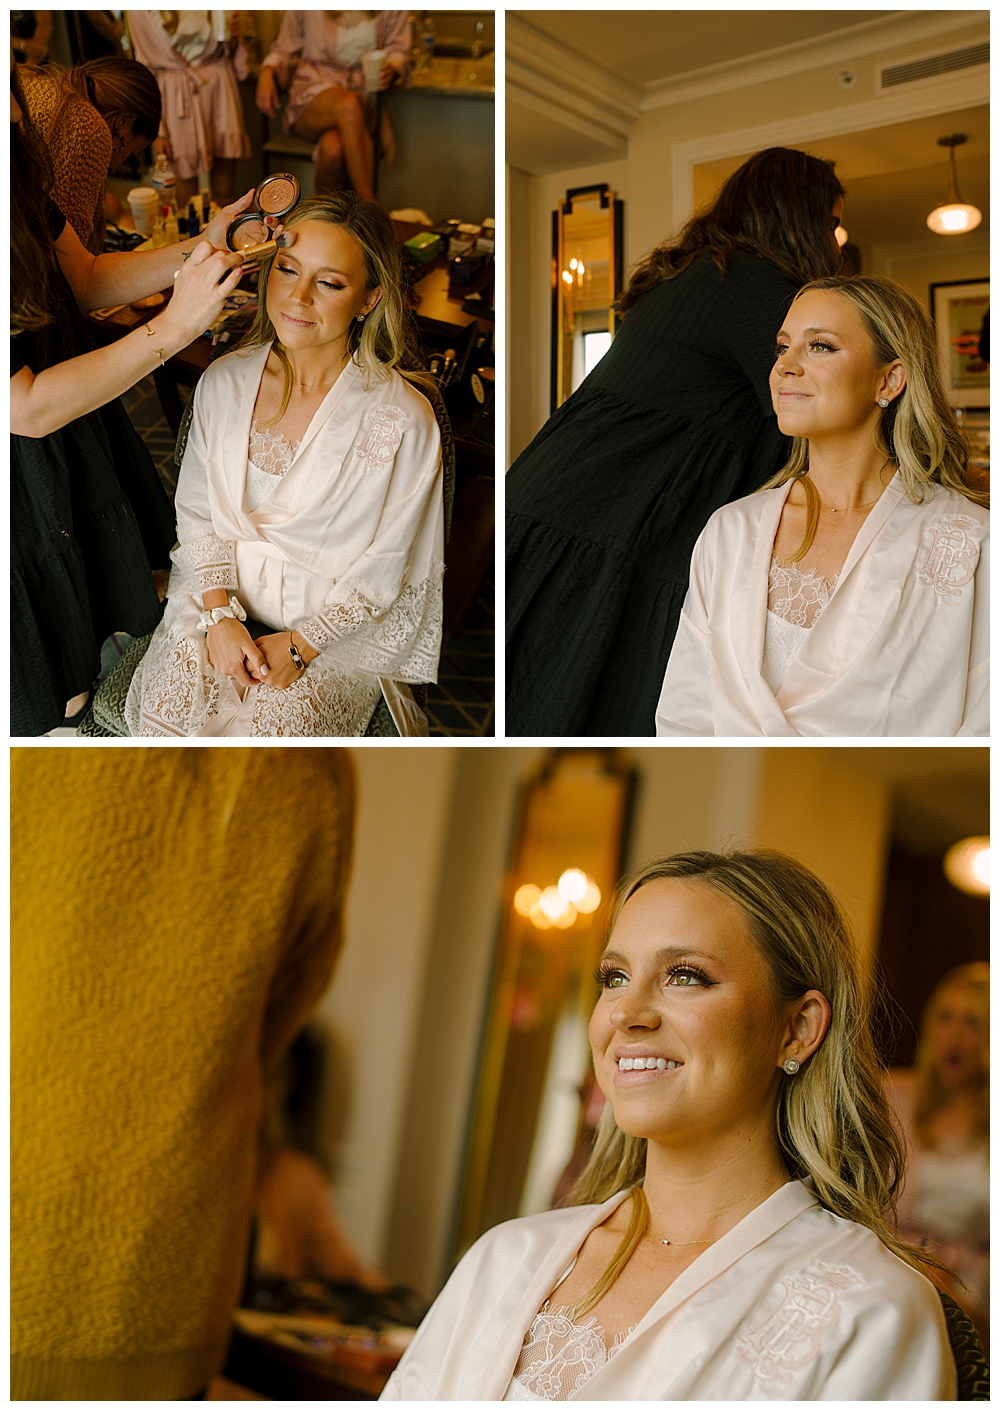 images of bride getting ready before wedding